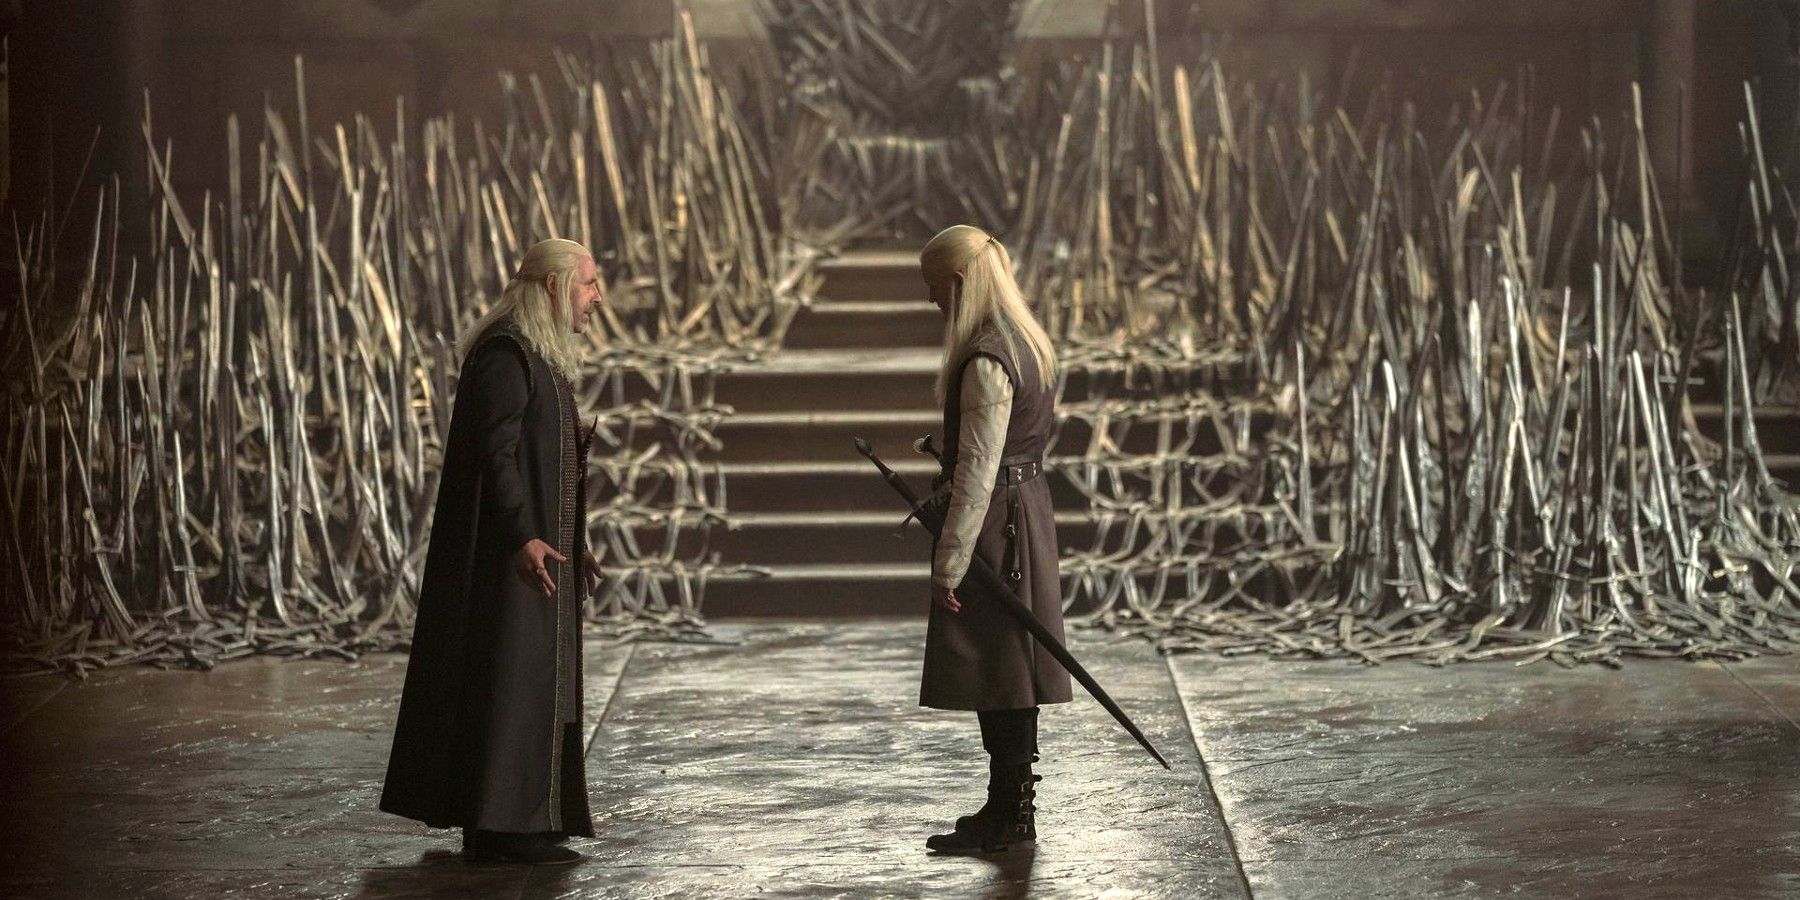 Viserys and Daemon Targaryen standing in front of the Iron Throne on House of the Dragon